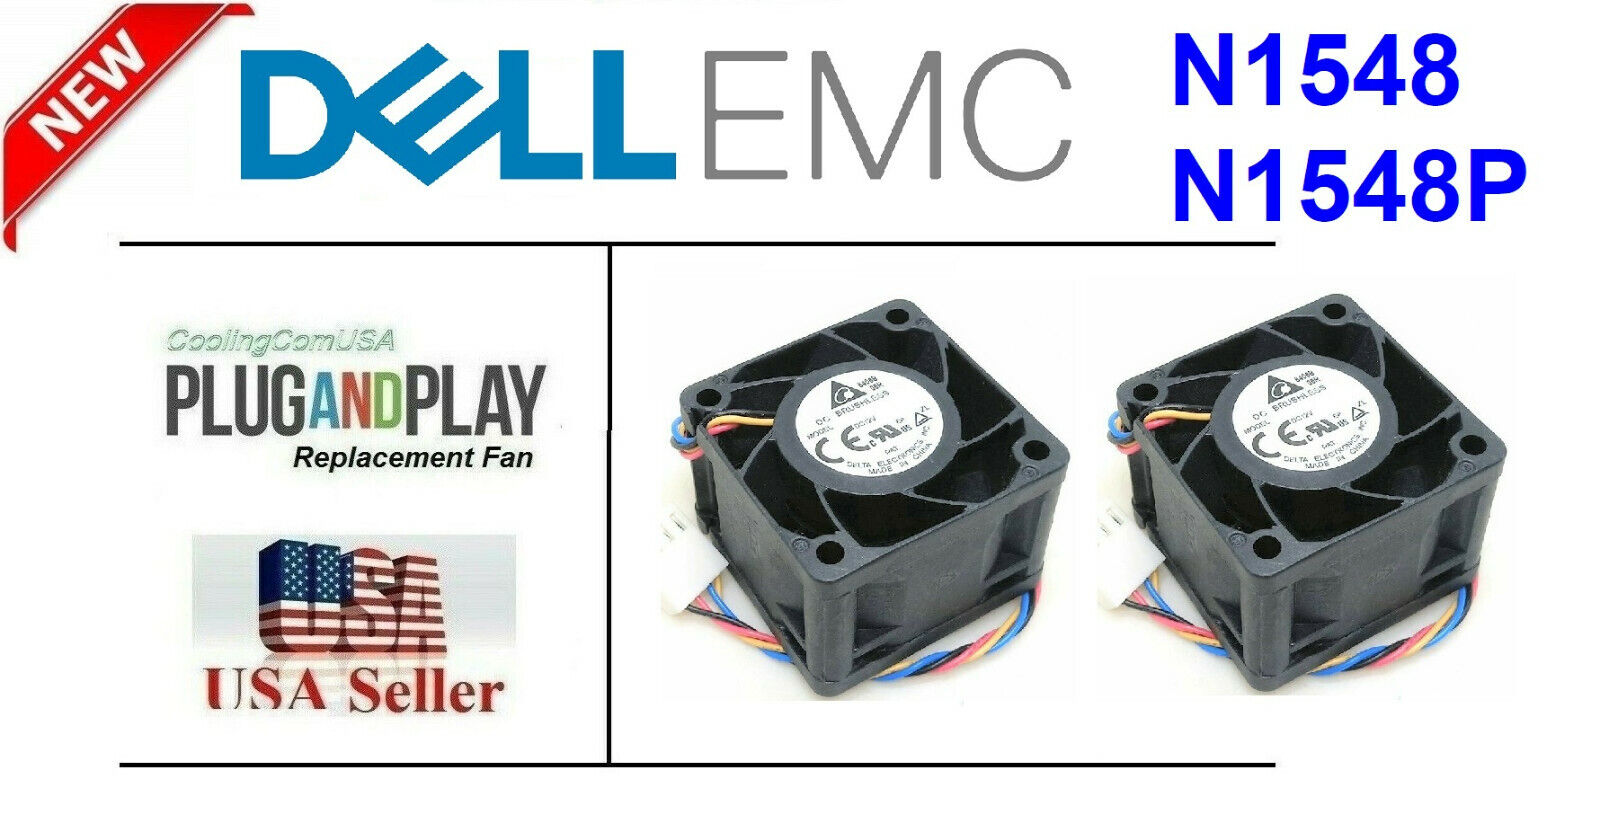 2x New Replacement Fans for Dell EMC PowerSwitch N1548 N1548P Fan